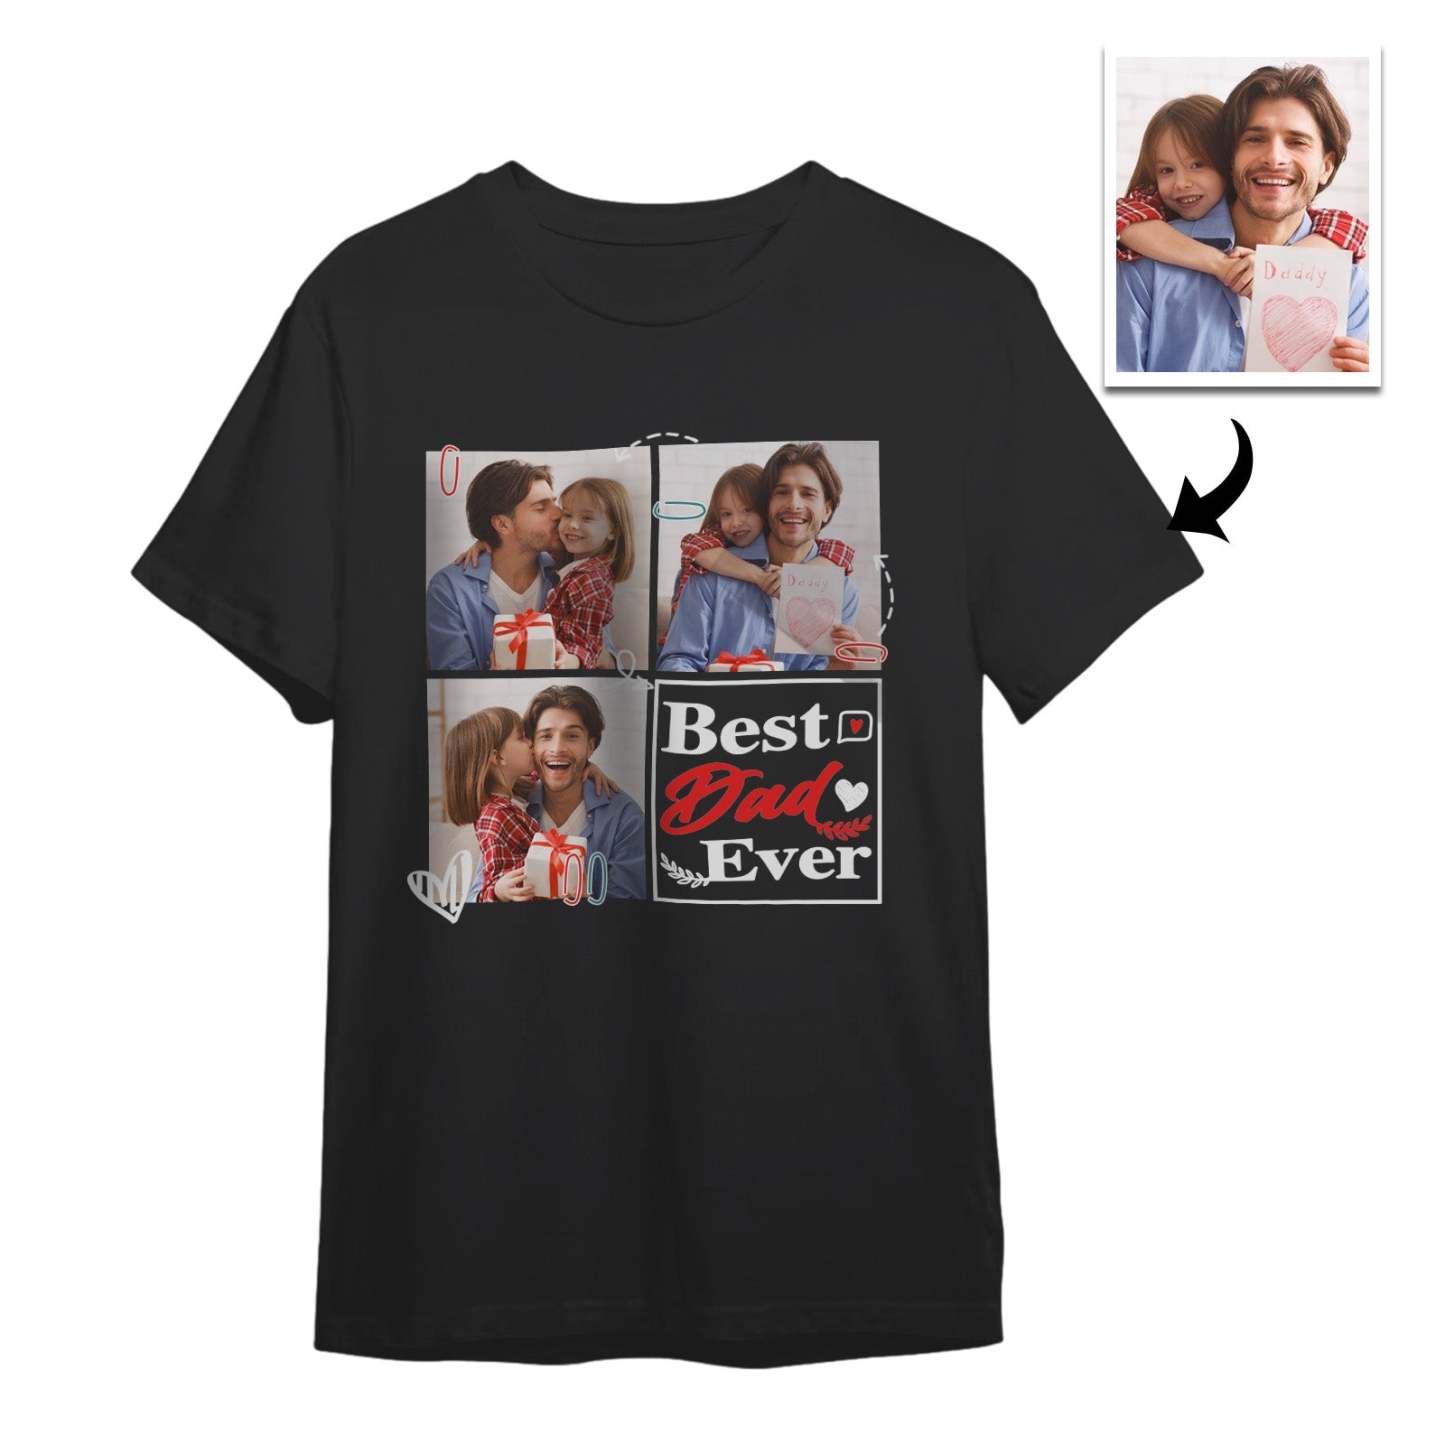 Custom 3 Photos T-Shirt Personalized Photo Men's T-Shirt Best Dad Ever Father's Day Gift Family T-Shirt - MyPhotoSocksAu